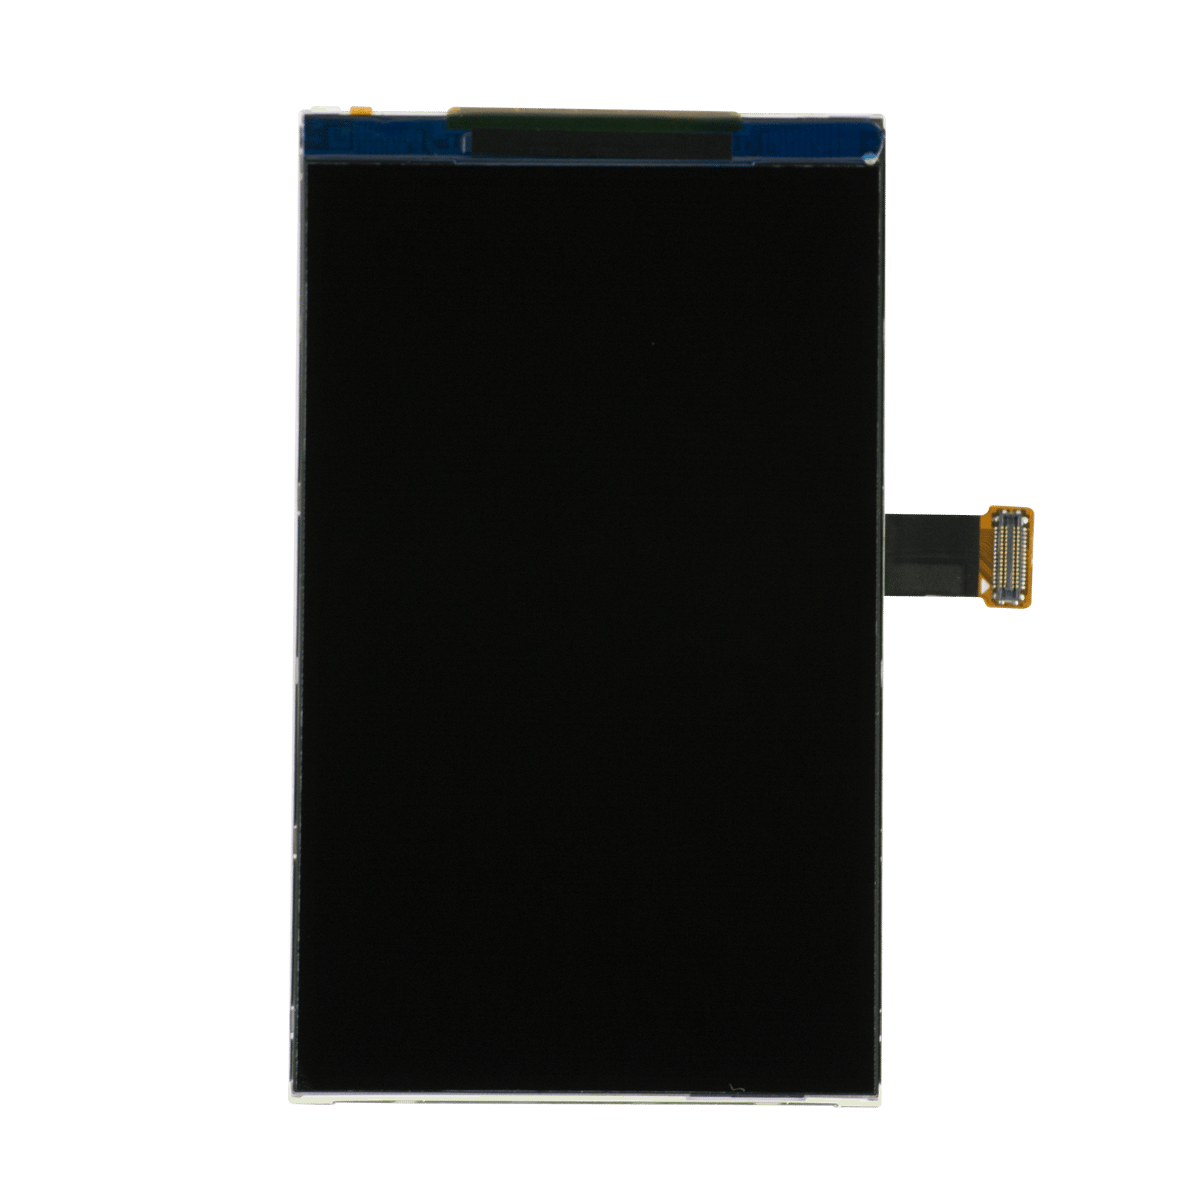 Samsung Galaxy S Duos LCD Screen Replacement